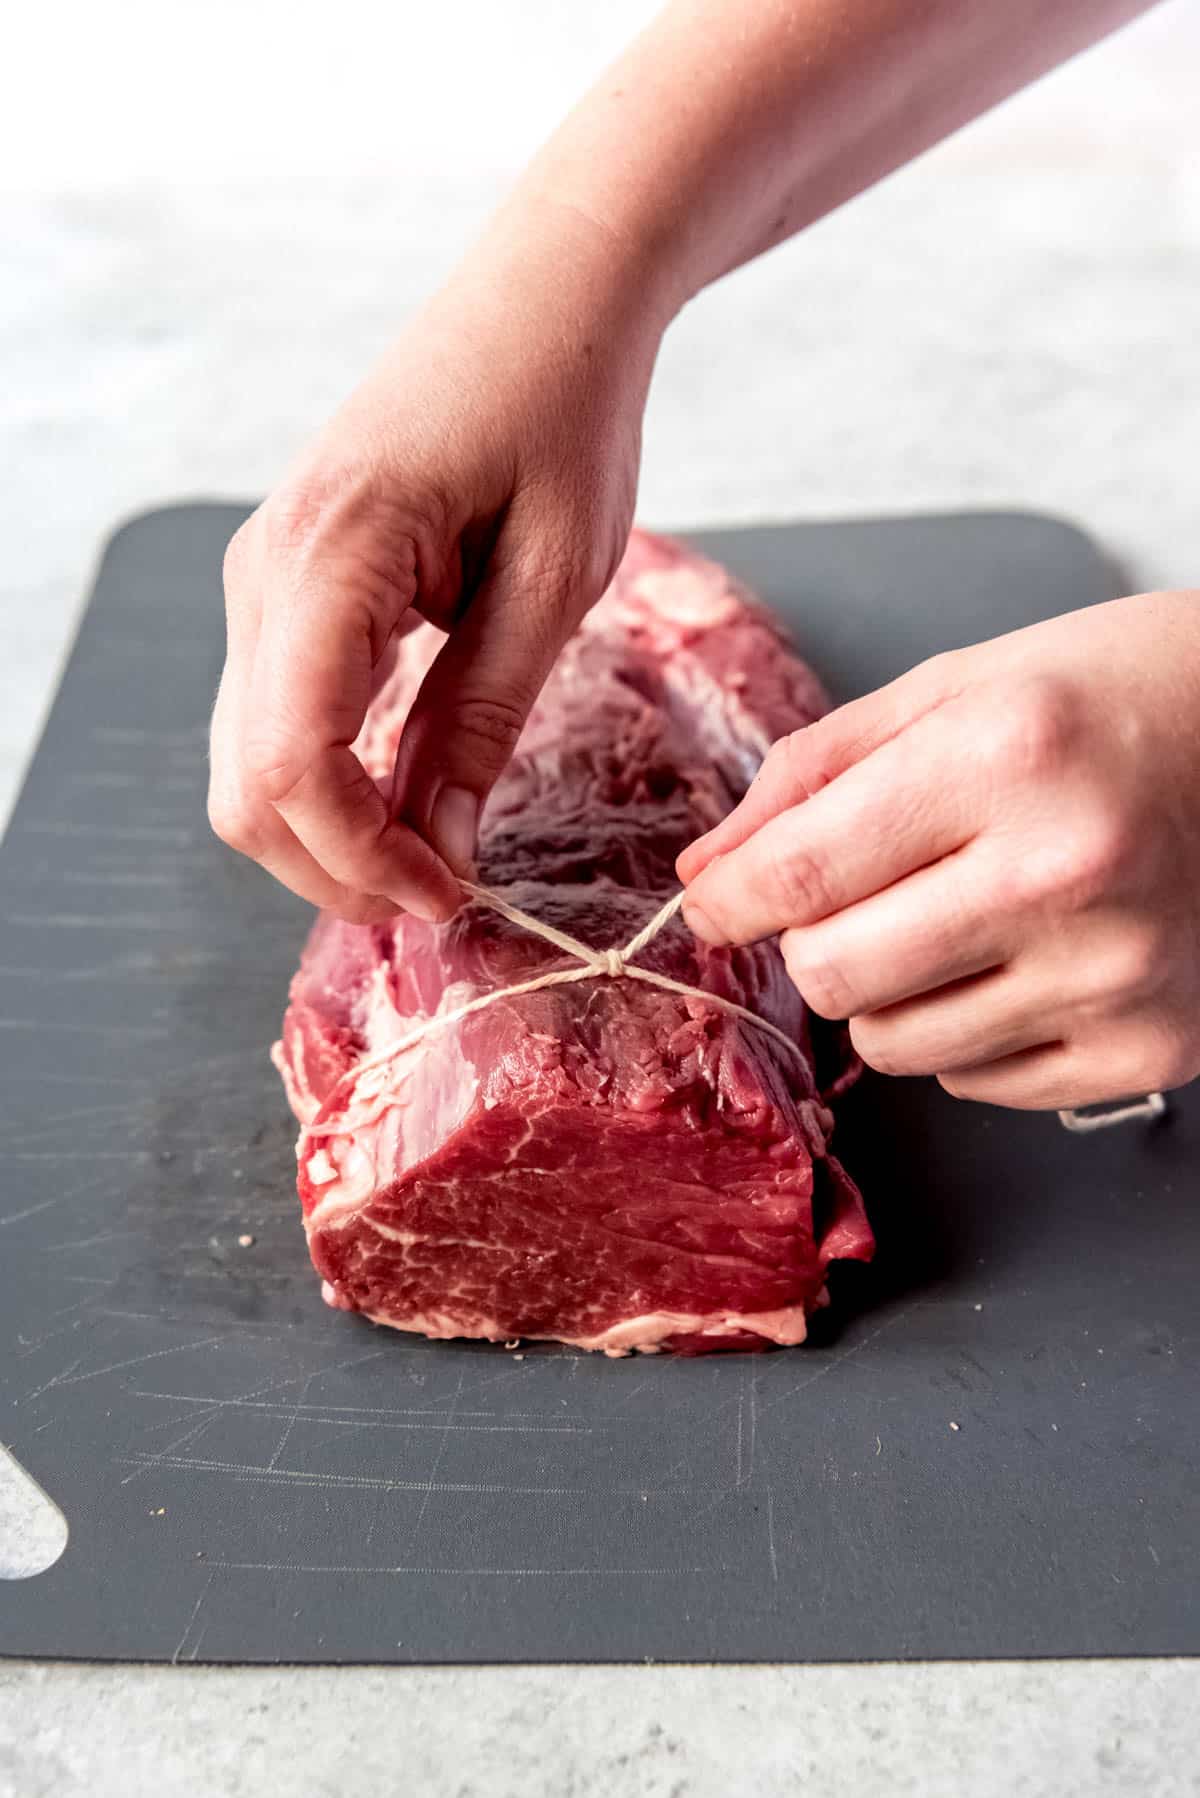 Top view of hands tying a knot in a kitchen string around a beef tenderloin roast.